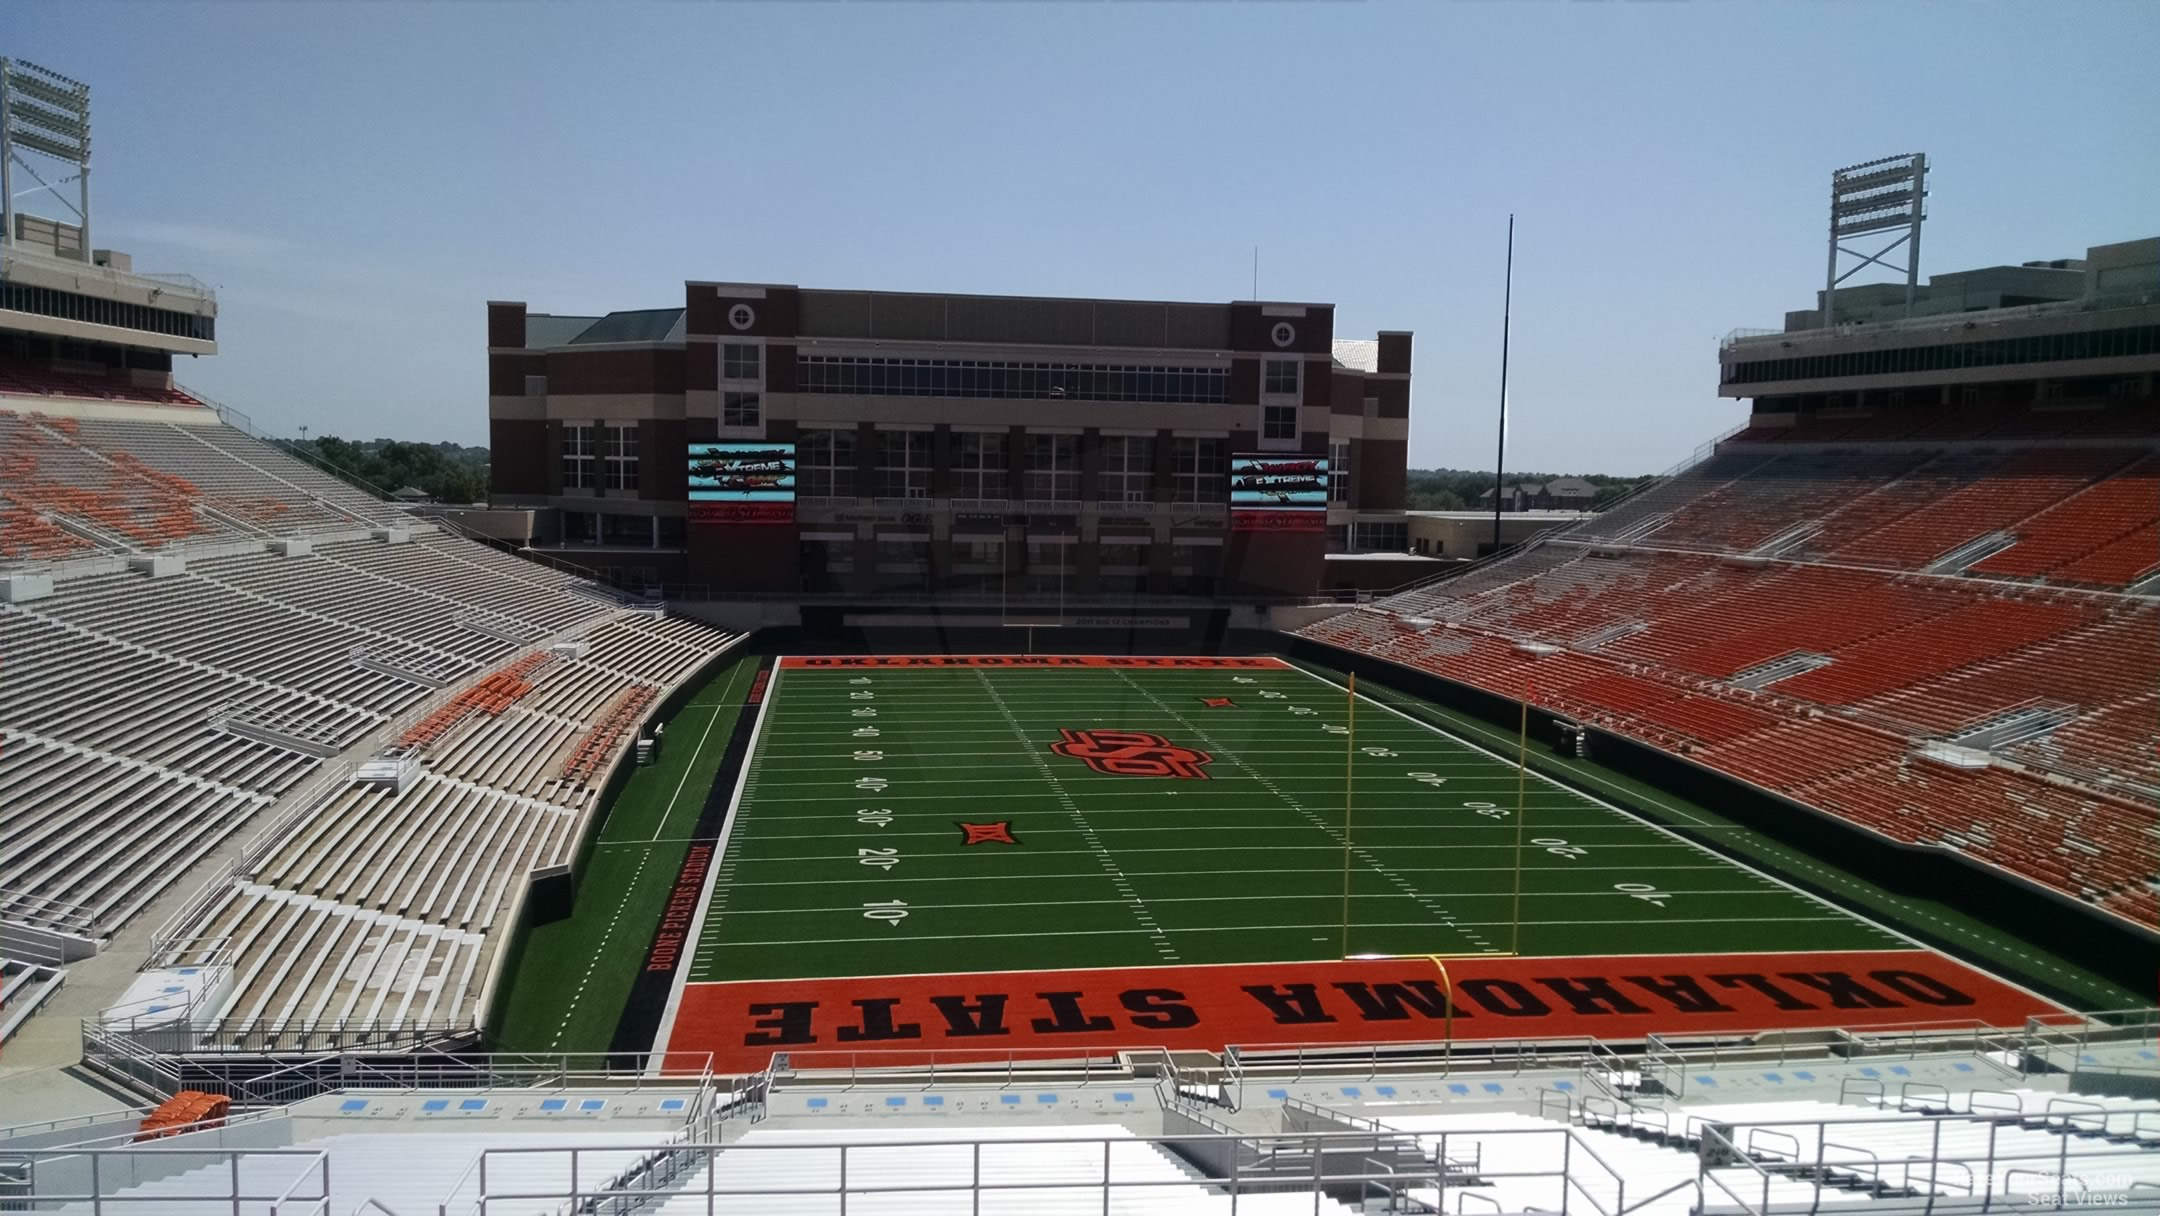 section 321, row 19 seat view  - boone pickens stadium